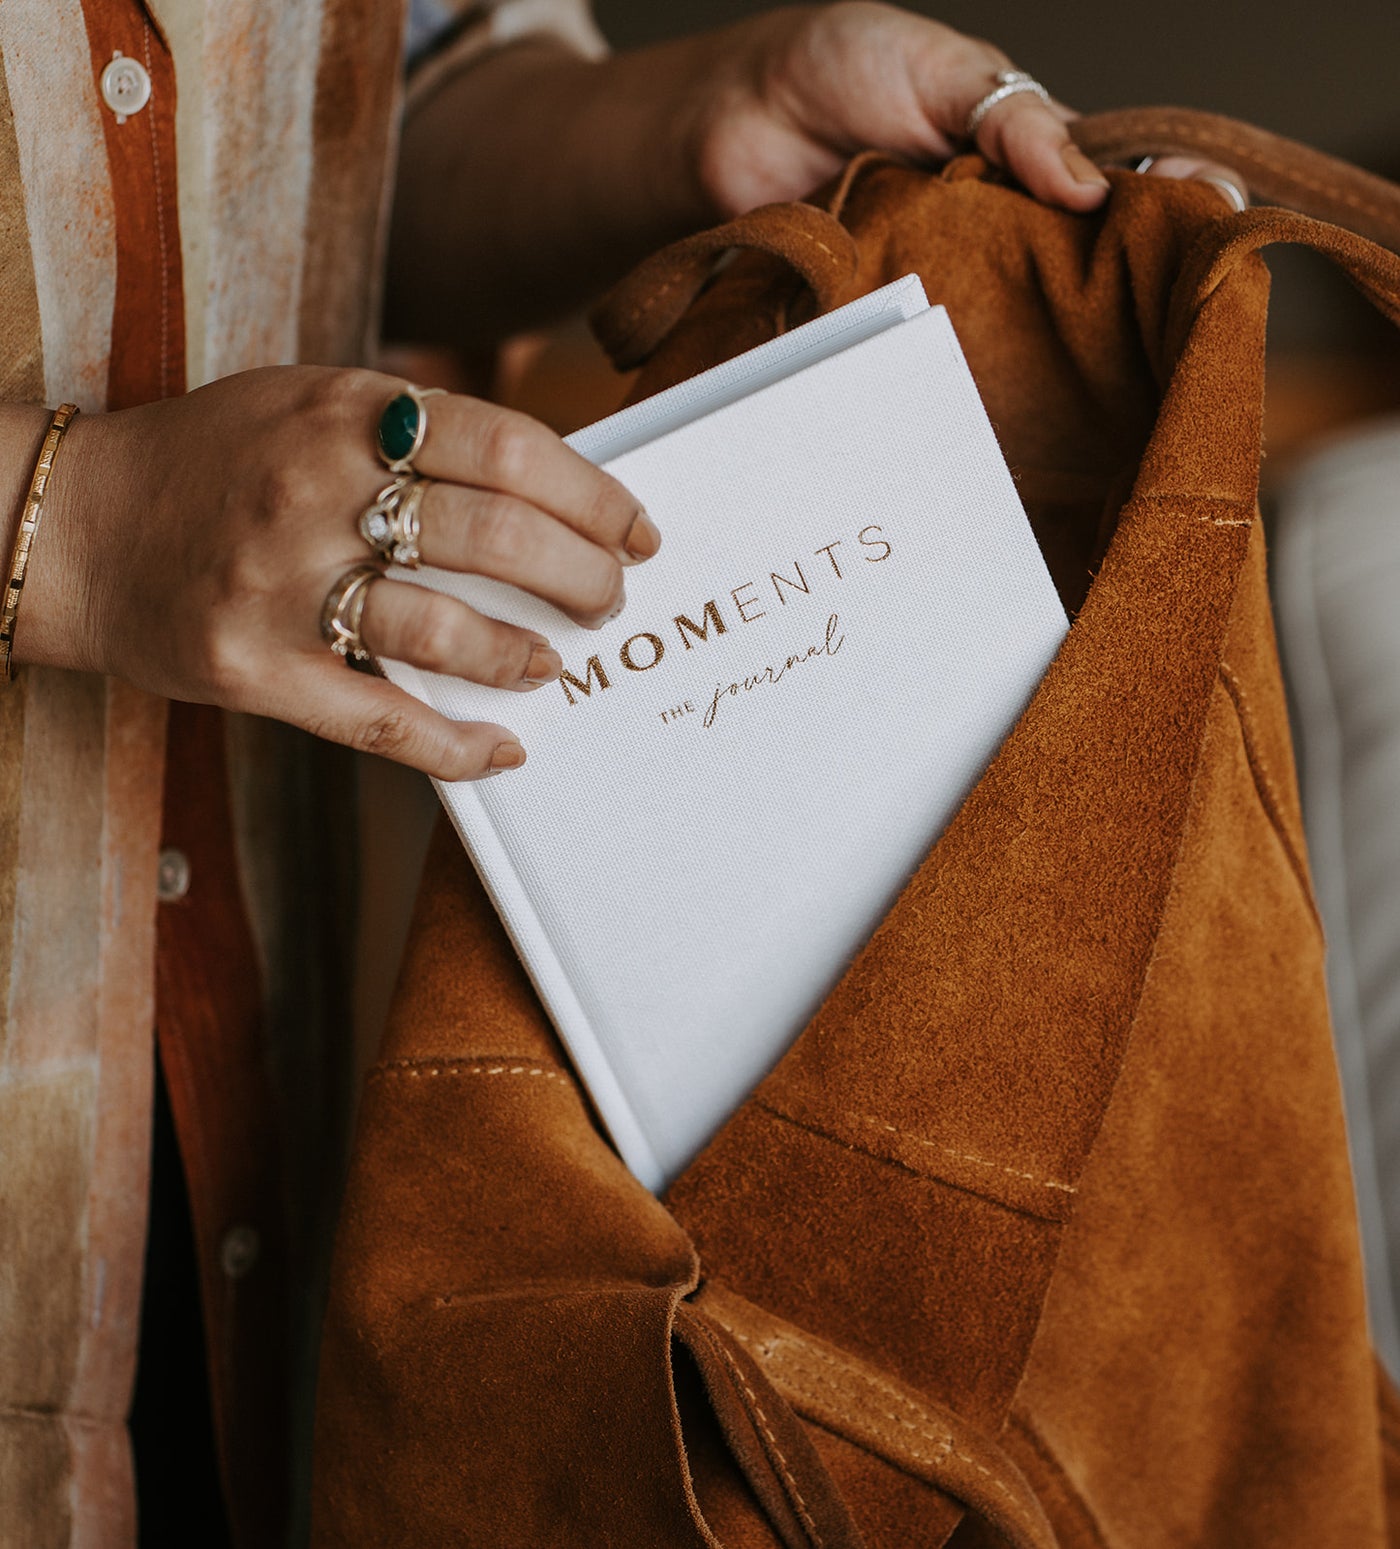 M O M E N T S - The journal for moms